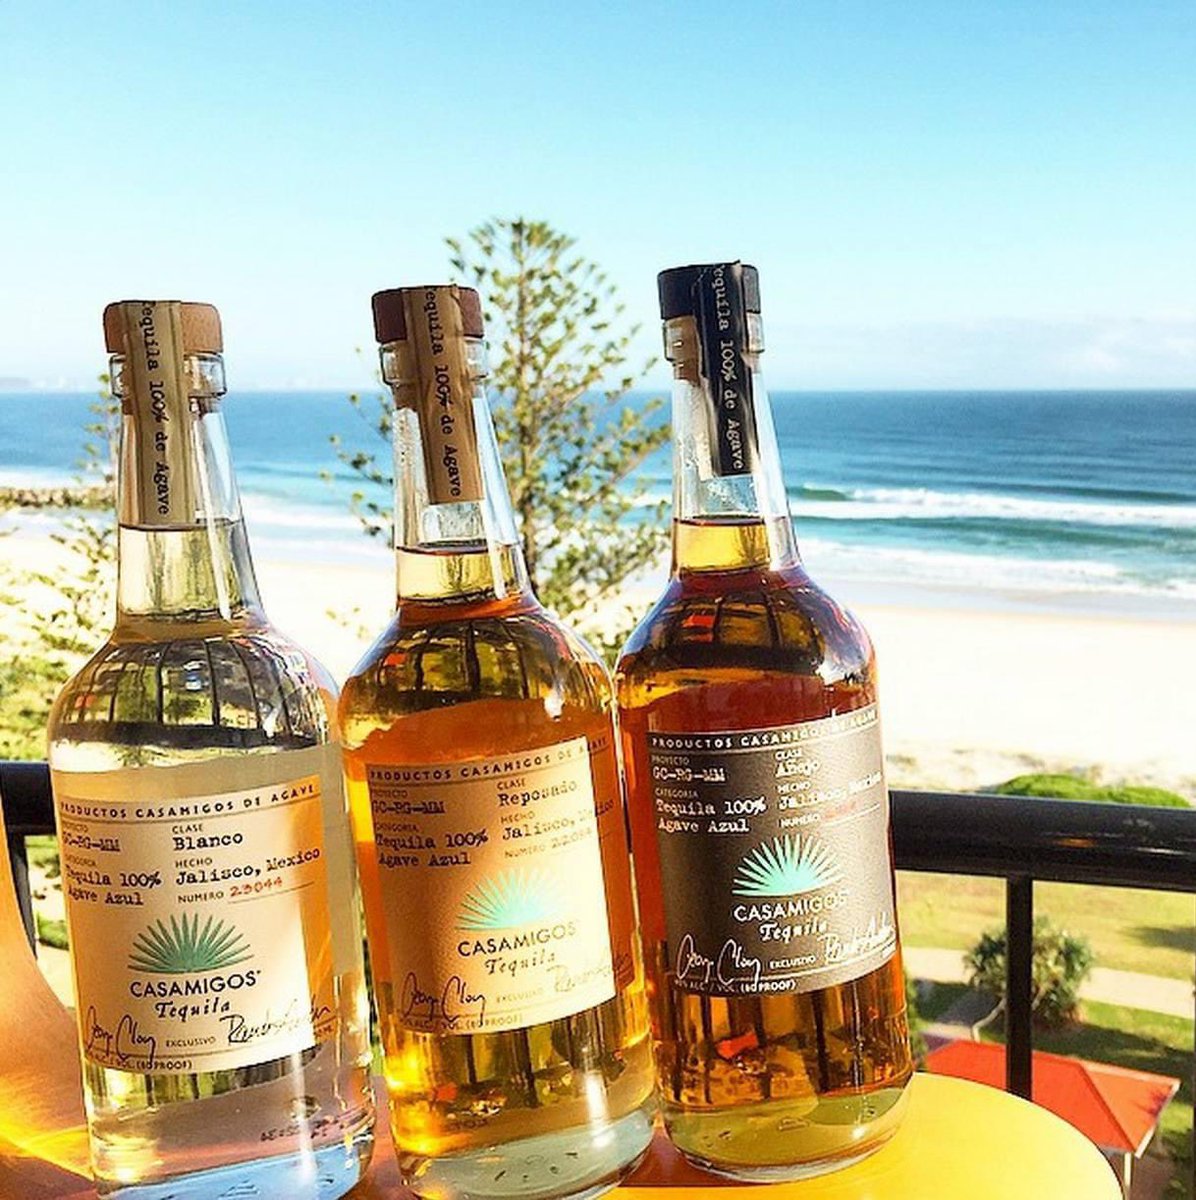 Made by friends, for all the friends. 
Casamigos Tequila - Blanco, Reposado, & Anejo are on sale thru Monday. 
Cheers, and dance like everyone is watching. 
northboulderliquor.com/specials/
📷 @Casamigos #drinkwithfriends #boulder